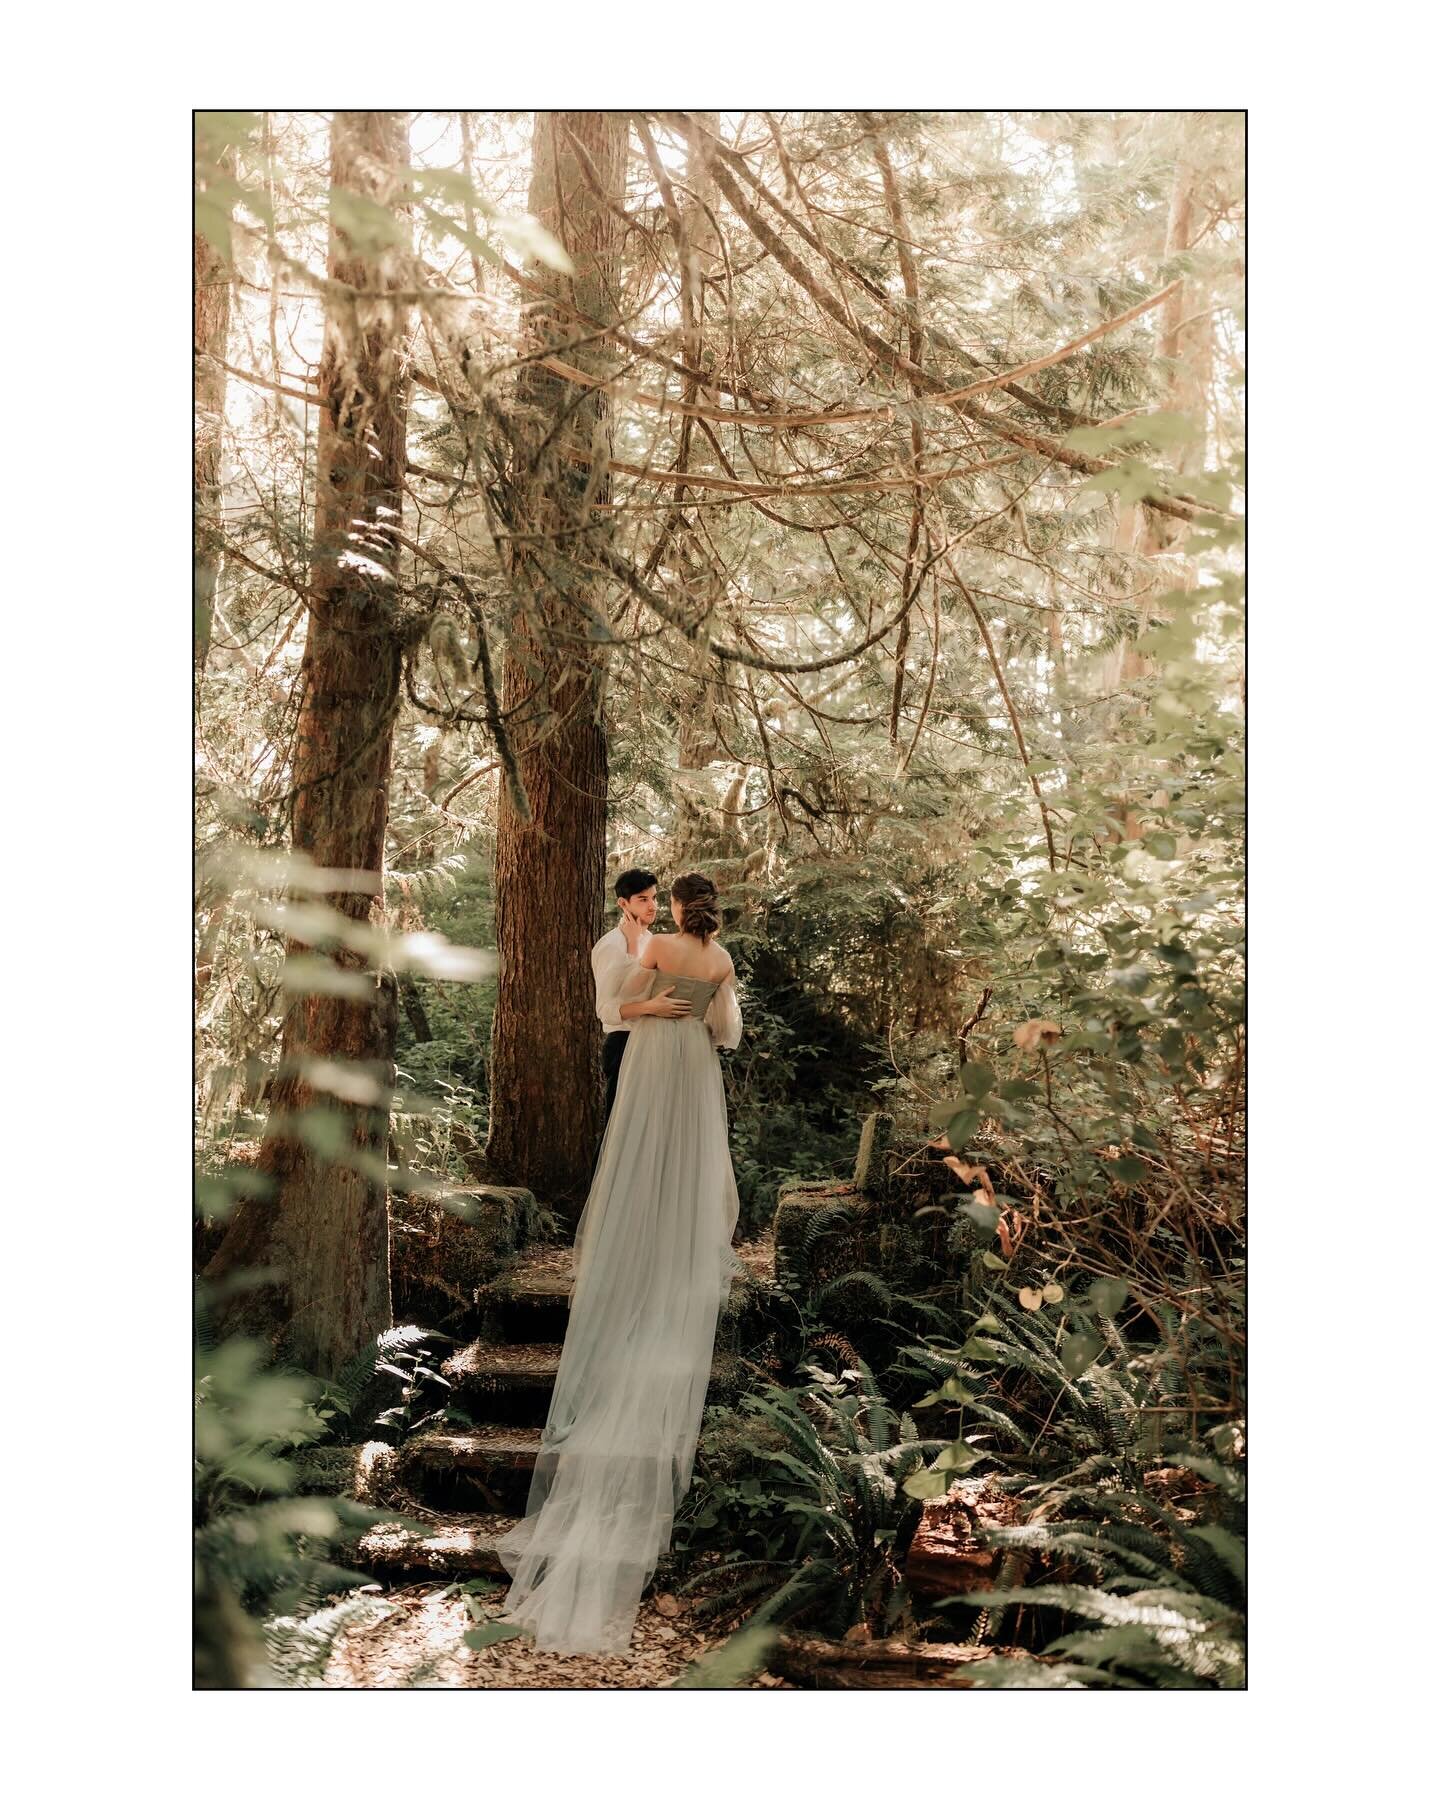 It&rsquo;s such a treat to be featured in the latest West Coast Weddings Magazine, Vancouver Island print issue. Especially because this oh so magical elopement shoot is one of our favs and we love the longevity it&rsquo;s had and always so fun to ha